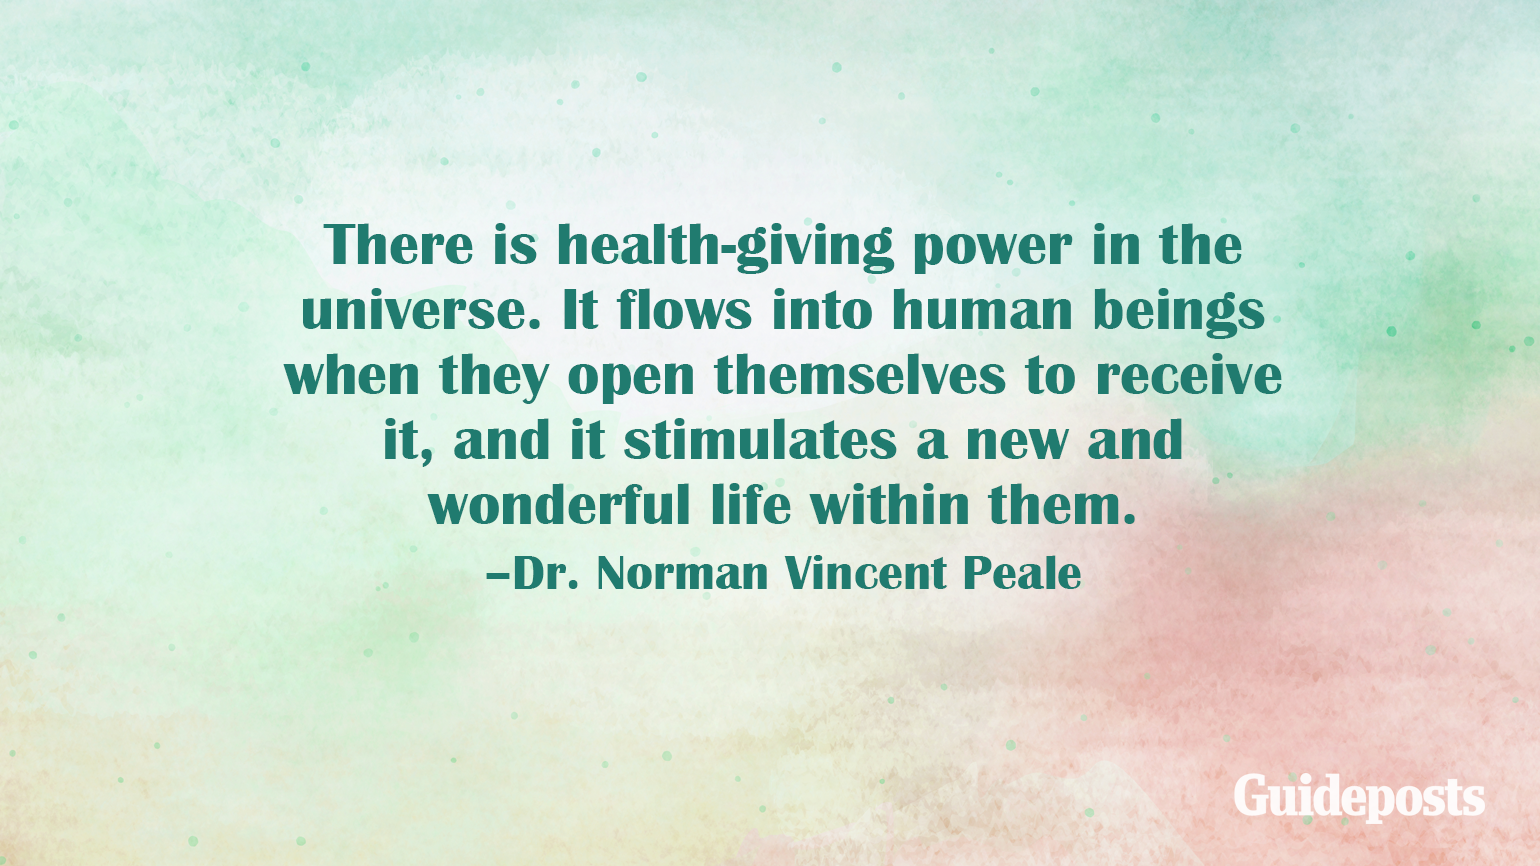 There is health-giving power in the universe. It flows into human beings when they open themselves to receive it, and it stimulates a new and wonderful life within them. –Dr. Norman Vincent Peale